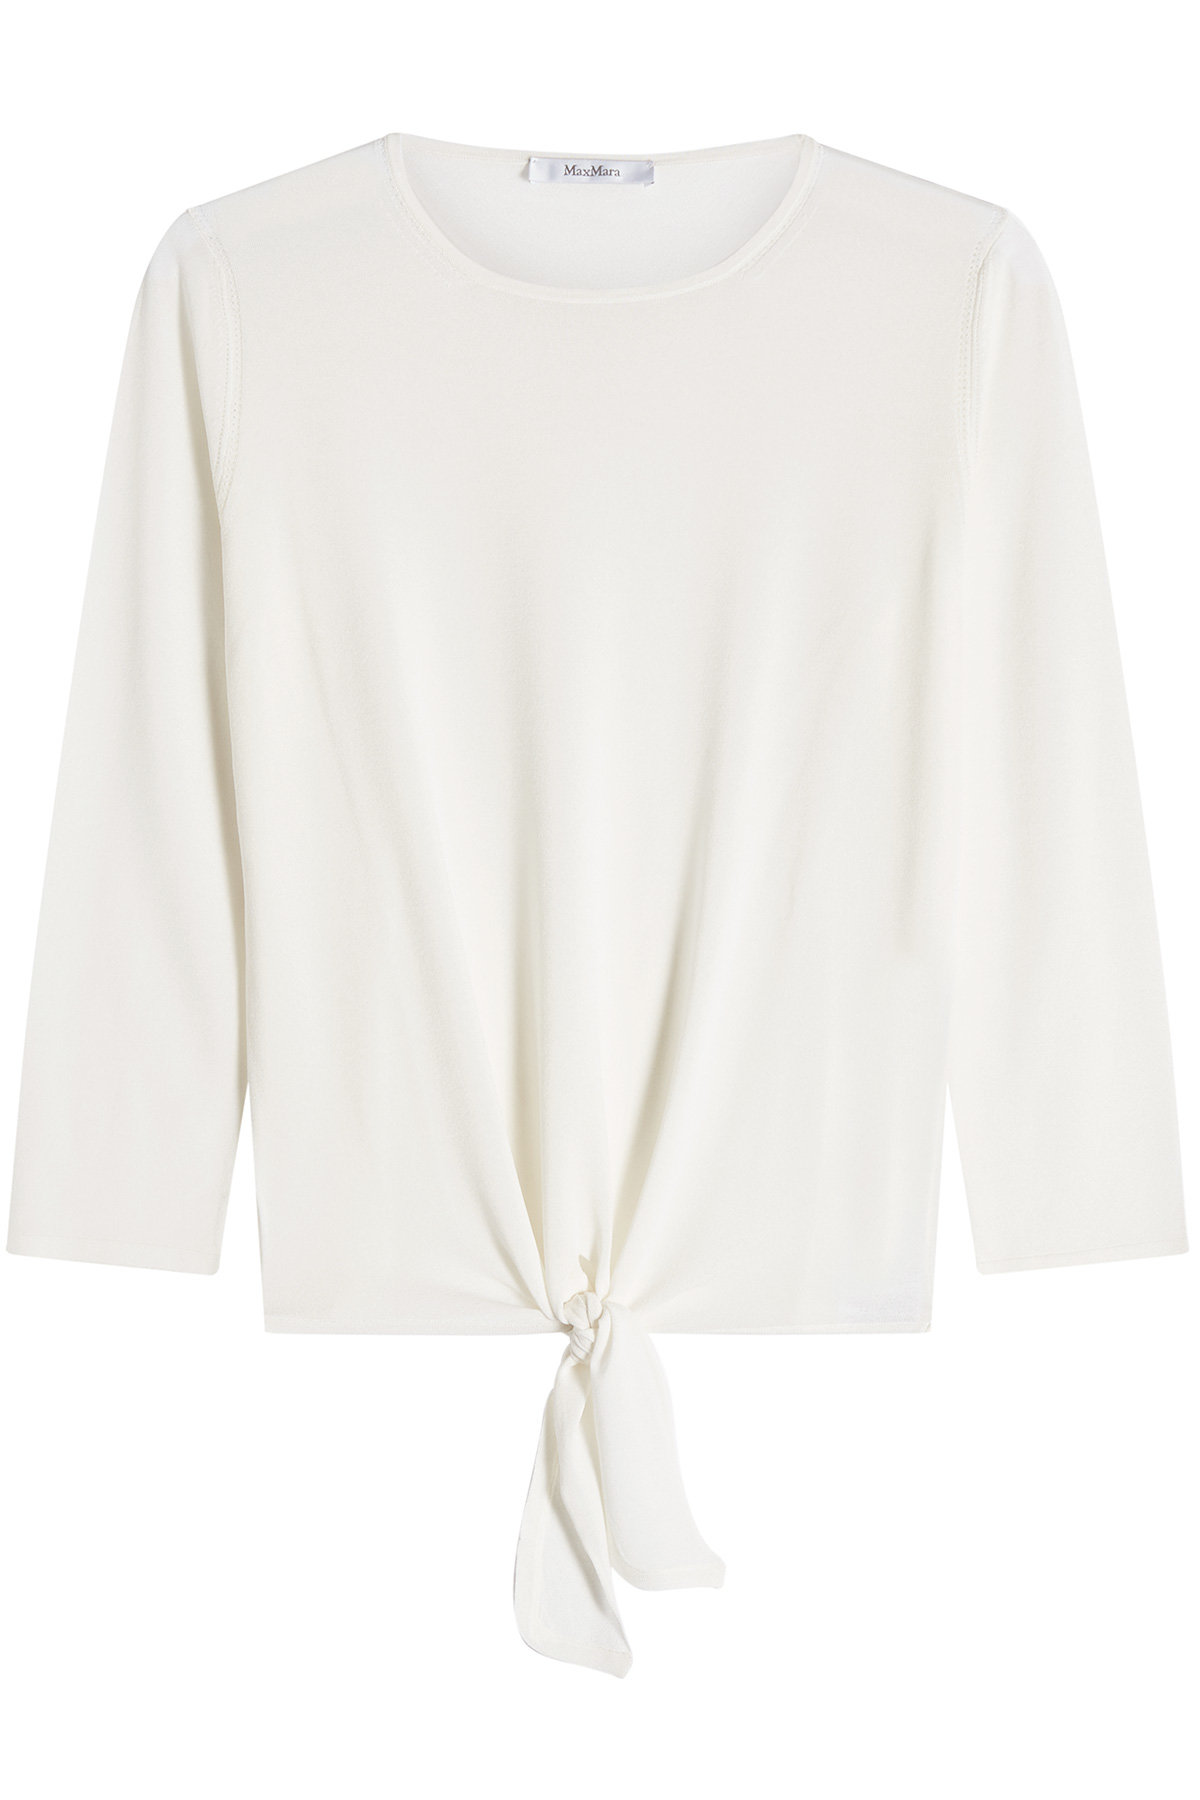 Top with Knotted Front by Max Mara